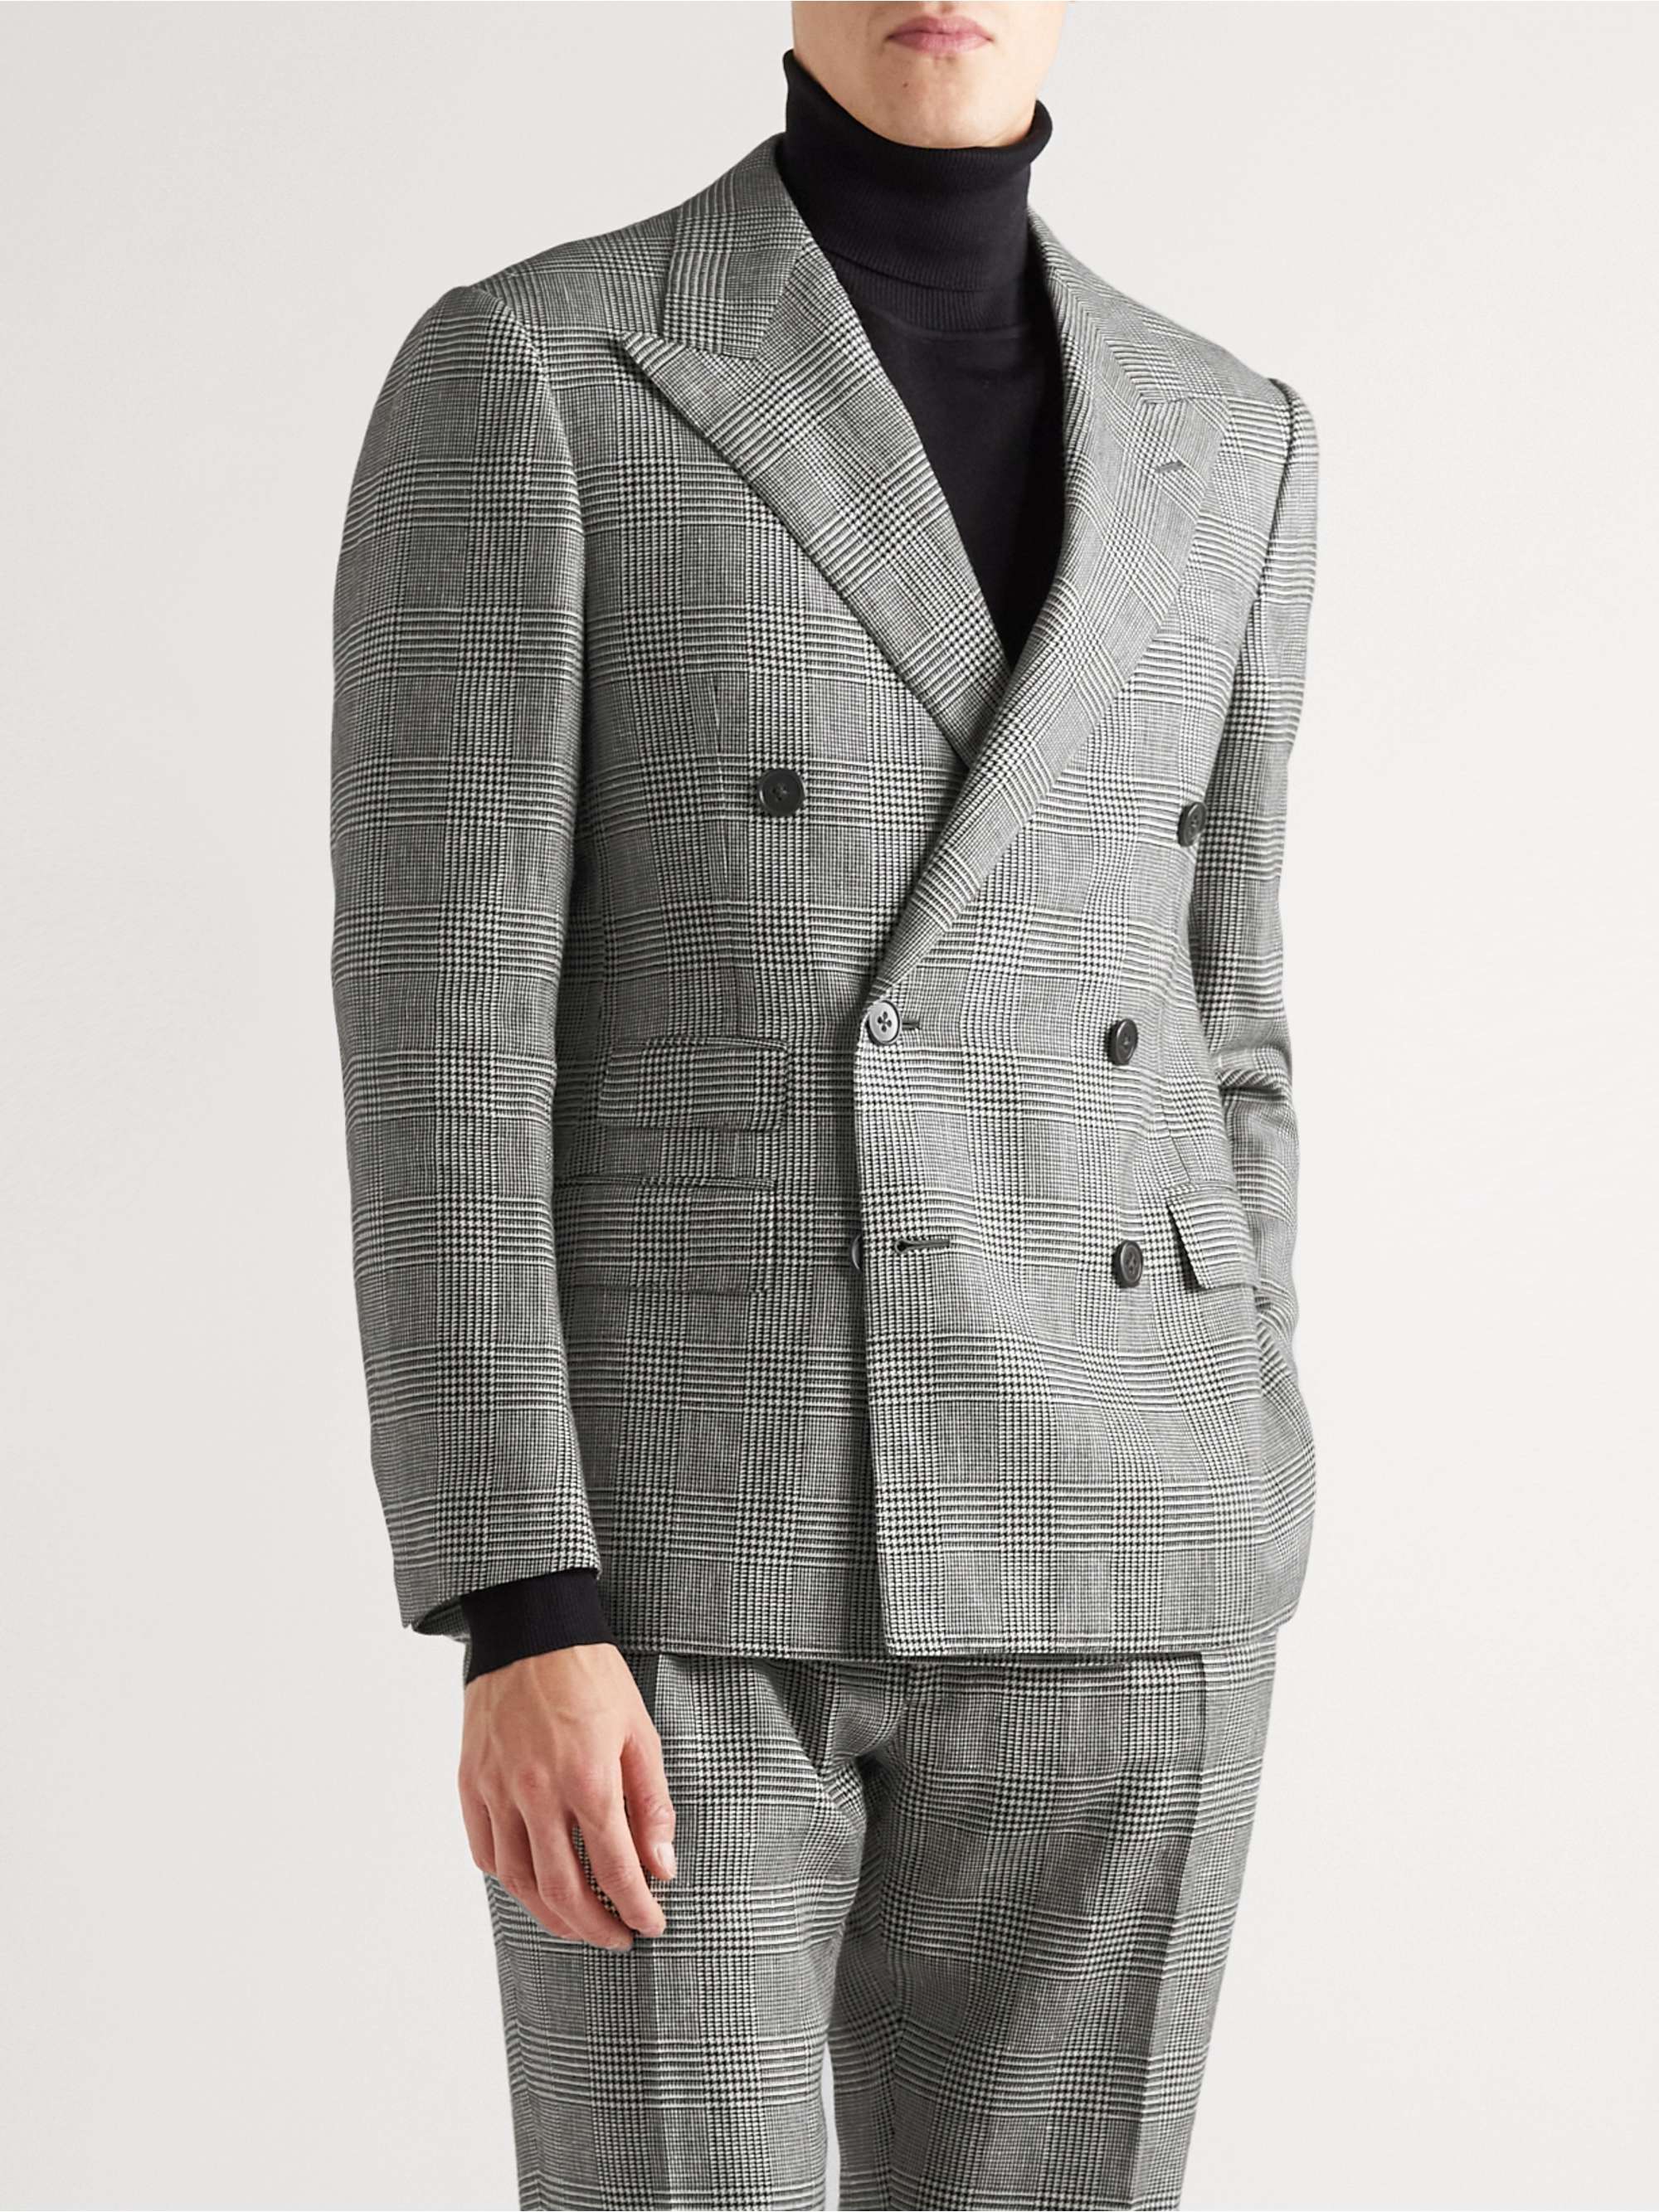 RALPH LAUREN PURPLE LABEL Kent Double-Breasted Prince of Wales Checked Wool  Suit Jacket | MR PORTER